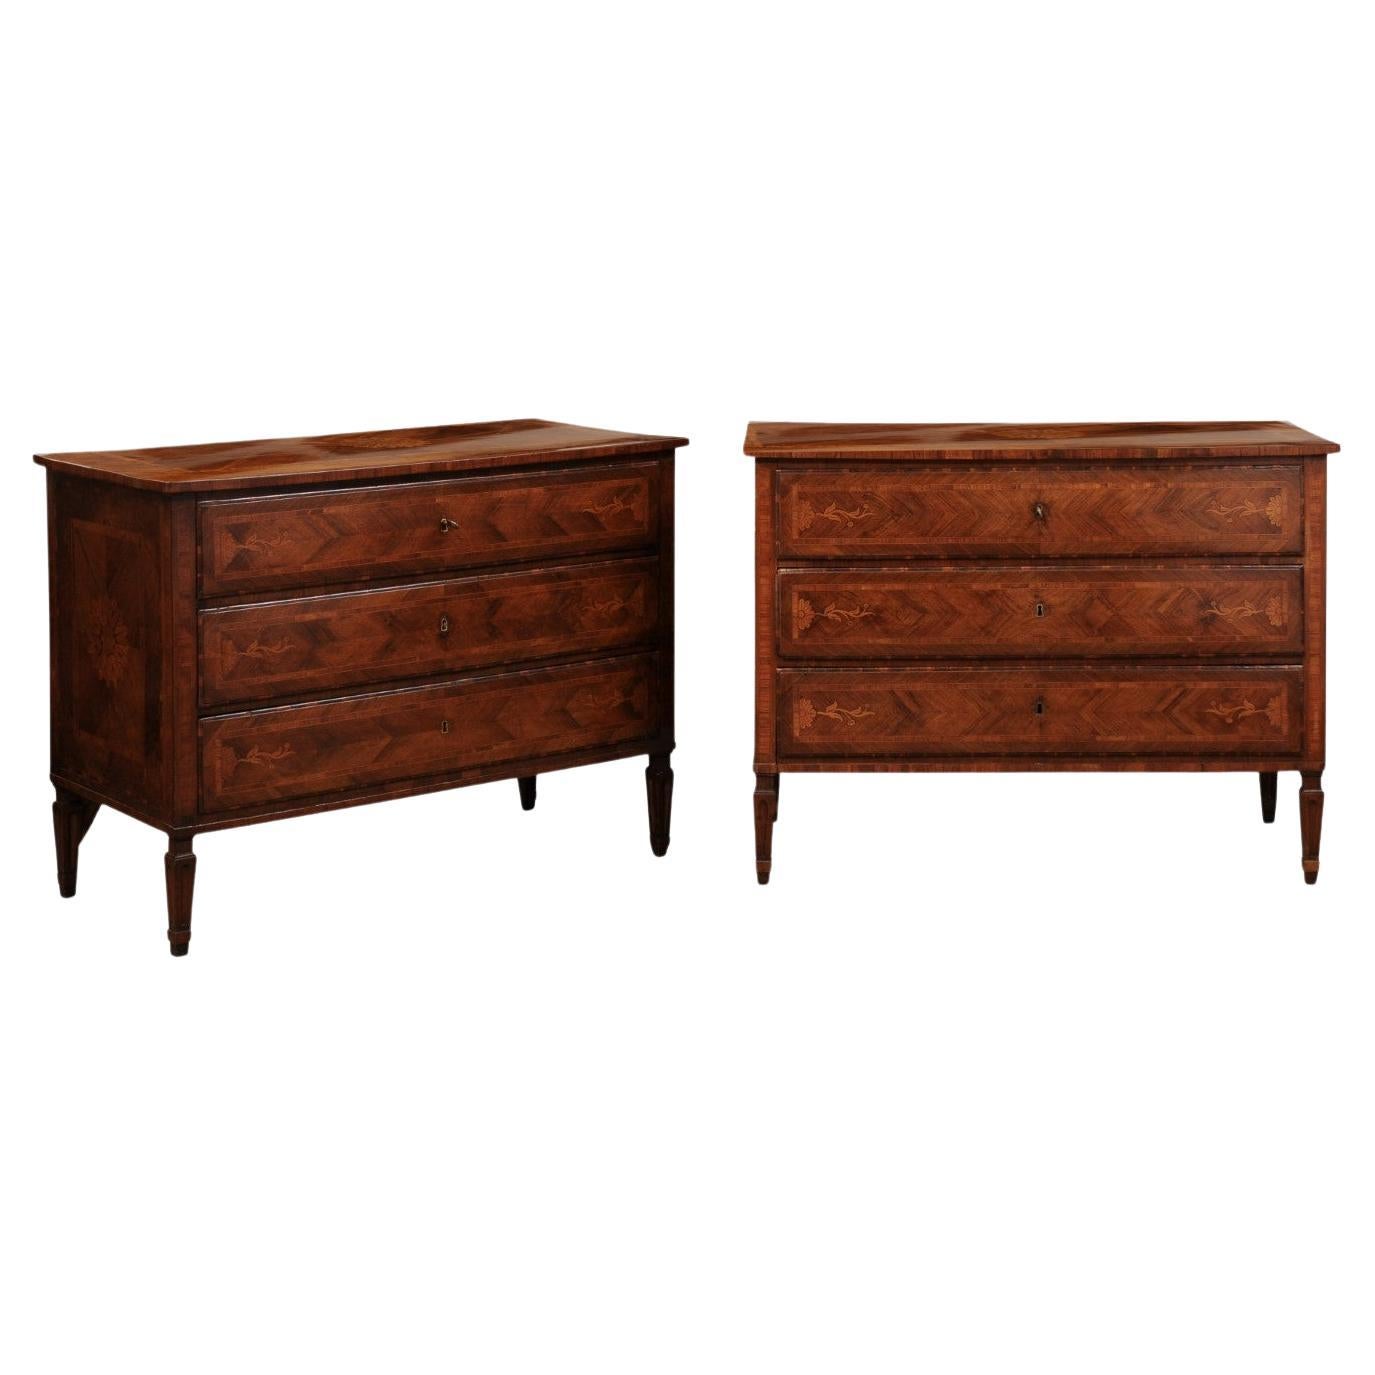 Pair of Italian Neoclassical Walnut Commodes with Foliage Design, 19th Century For Sale